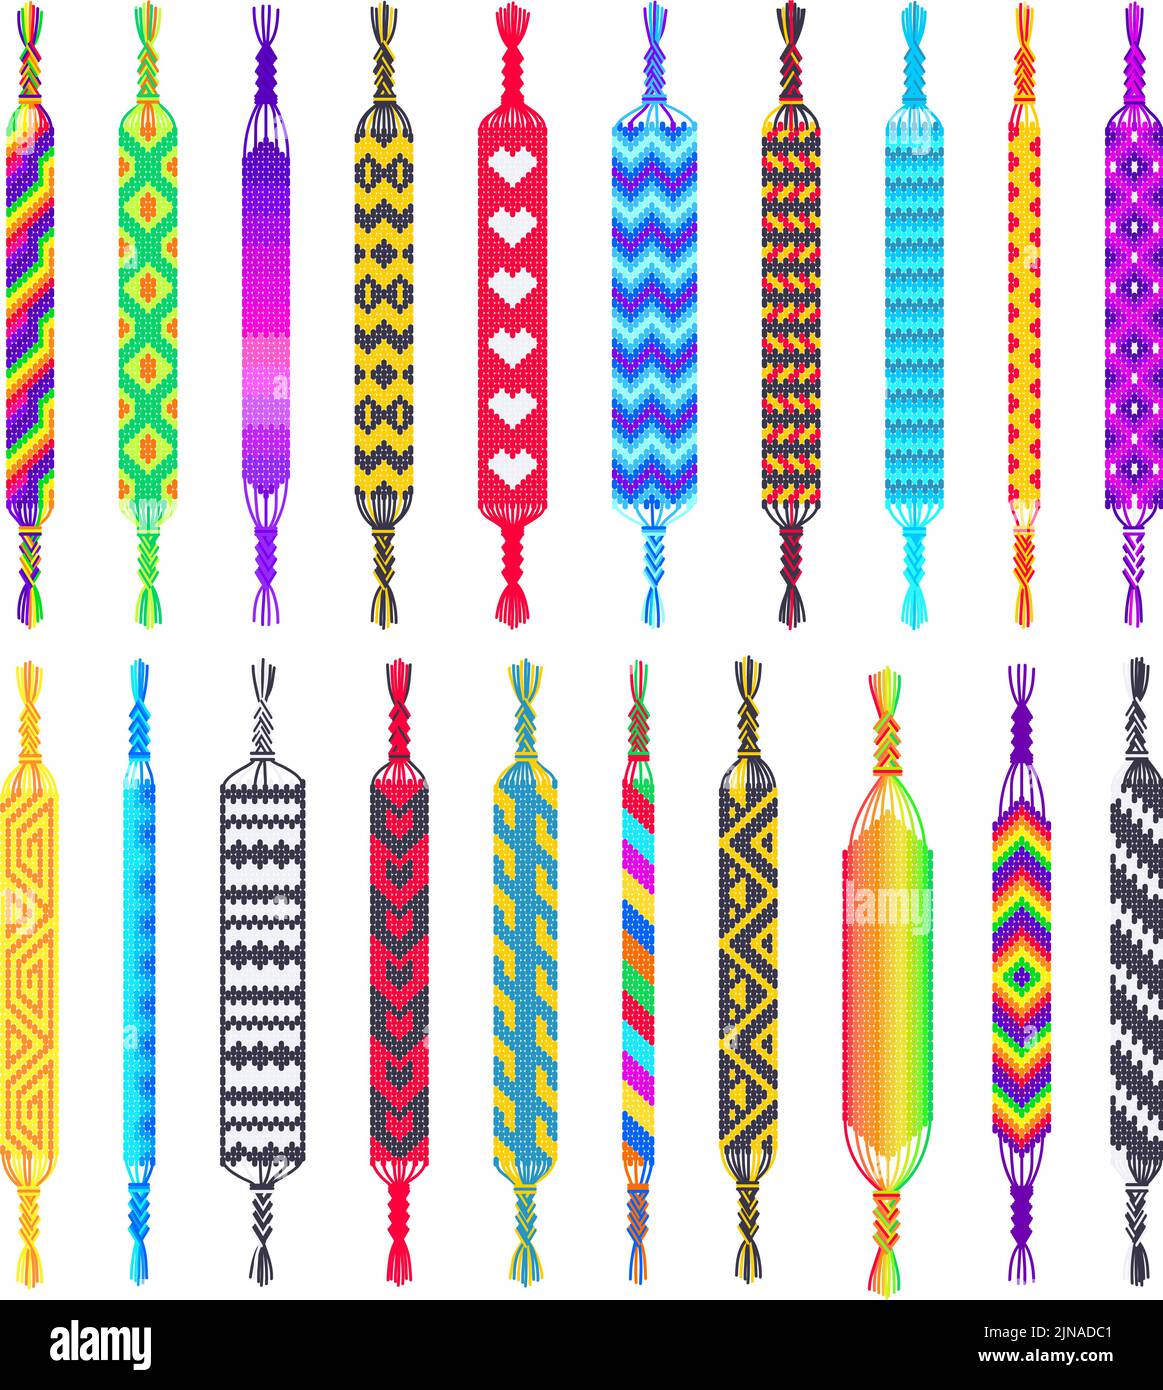 Friendship bracelets. Hippie braided wristband, wrist bracelet with pattern and hand made jewellery vector set Stock Vector